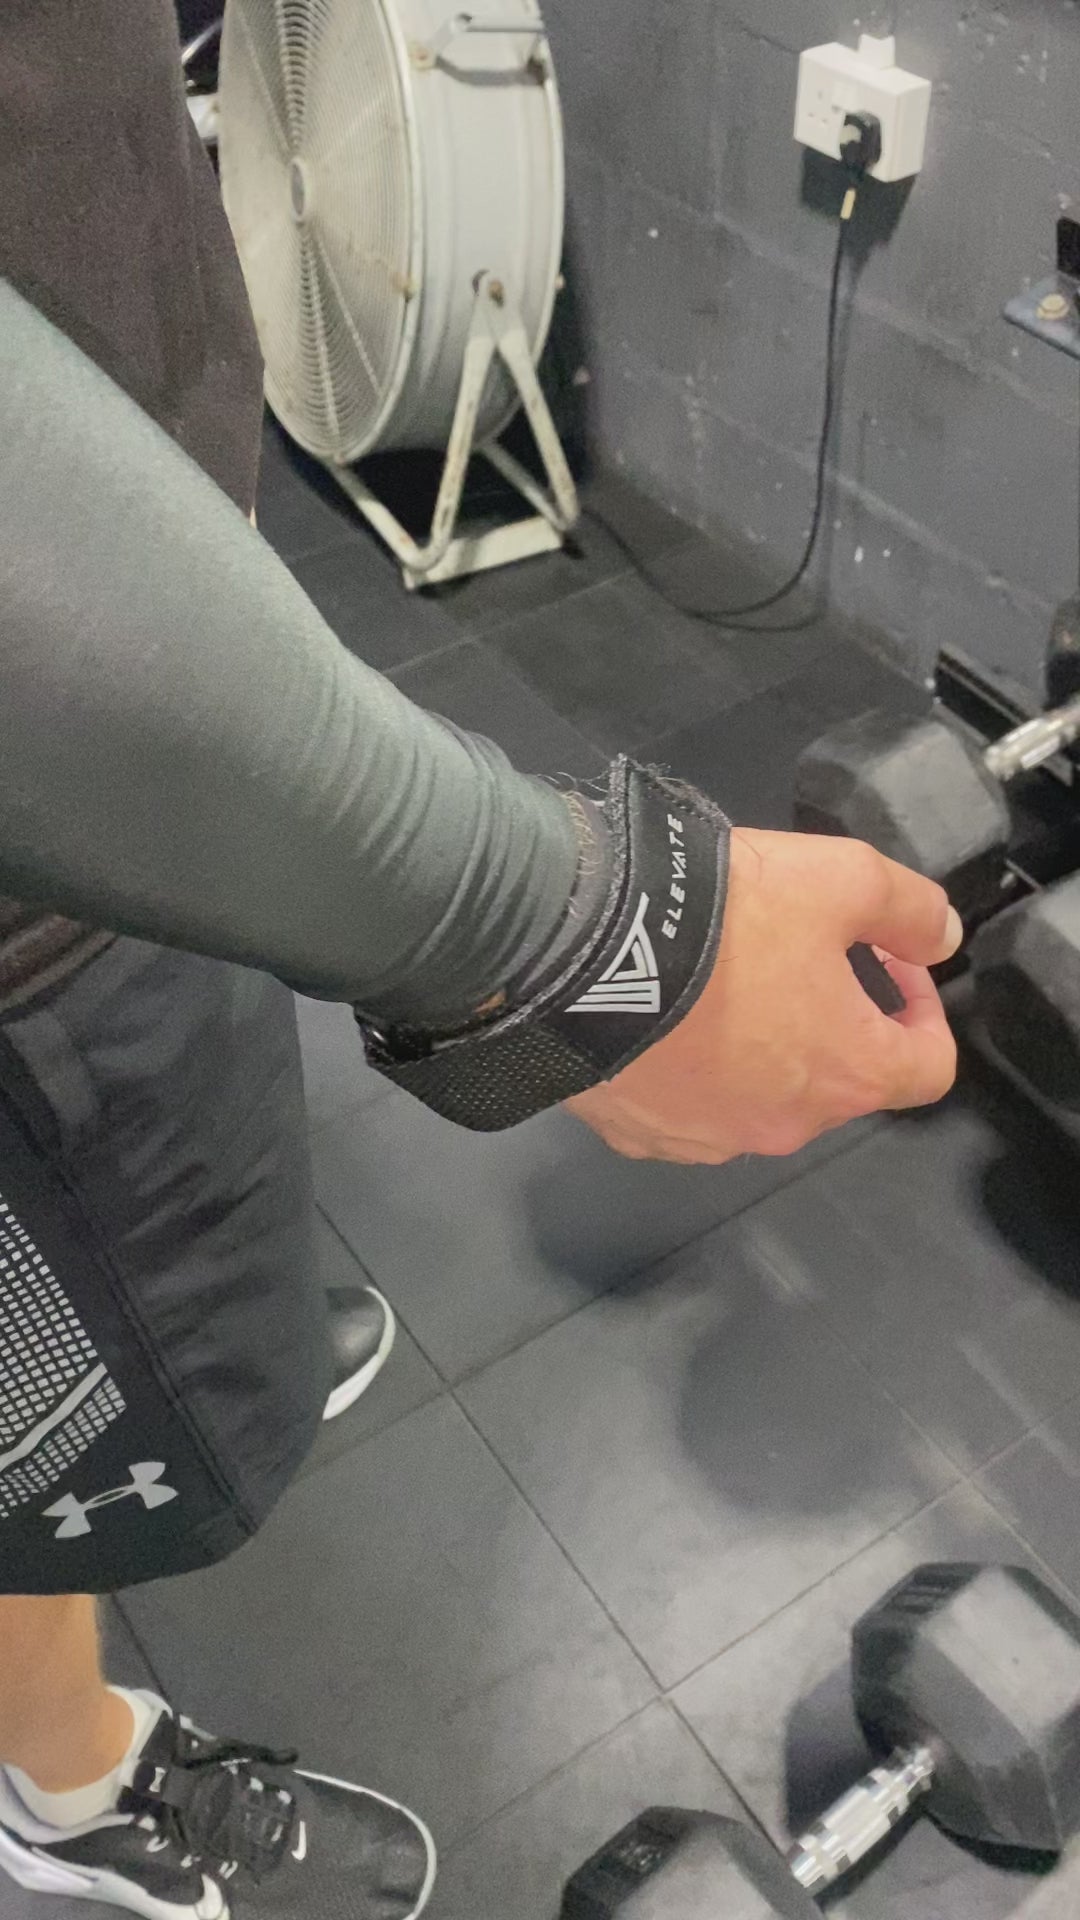 Elevate Grips Gym Straps